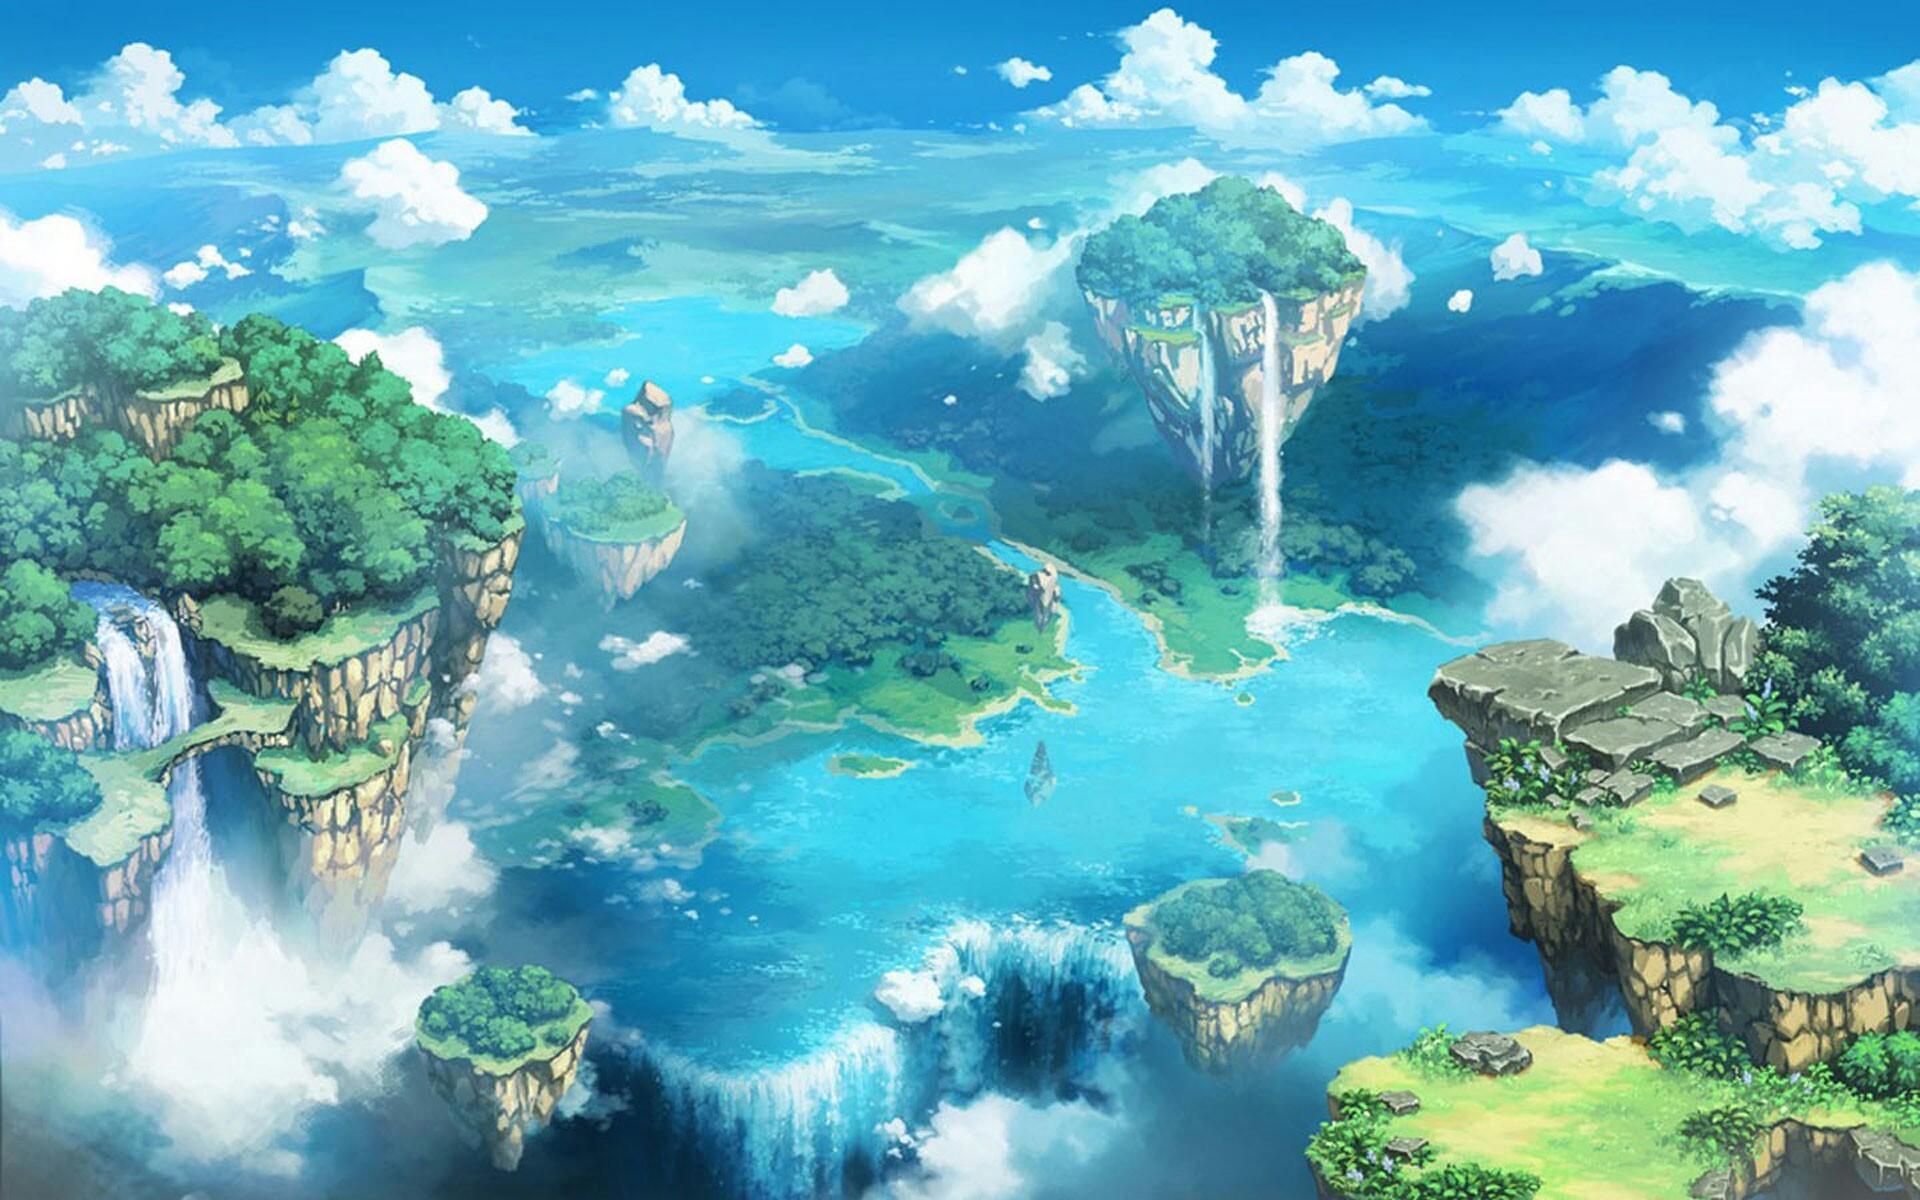 Scenery Anime Aesthetic Wallpapers - Wallpaper Cave